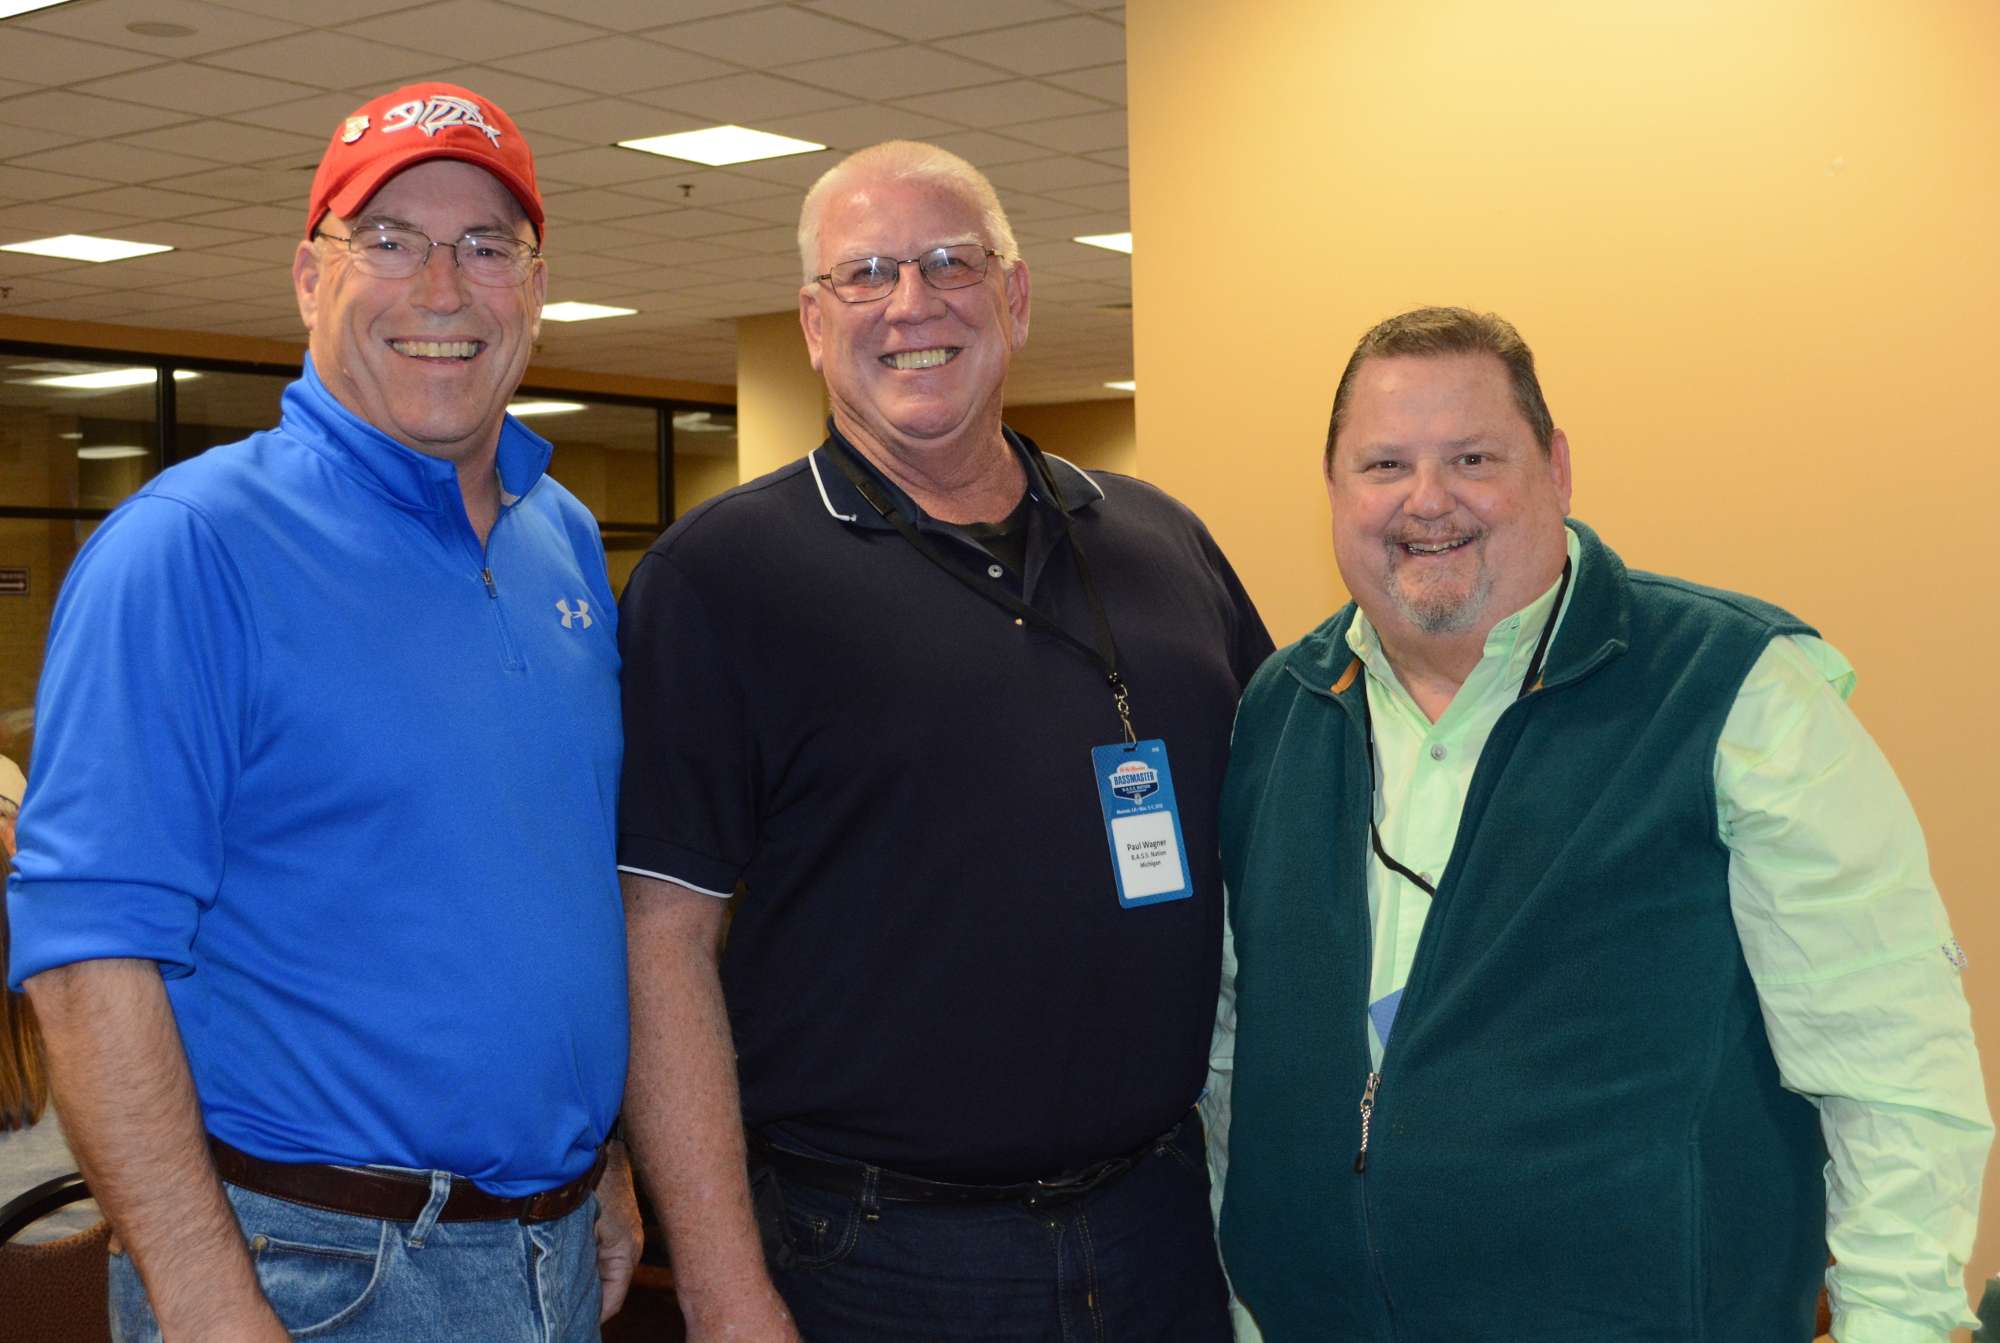 We like to call this Michigan's Team Paul -- incoming president Paul Rambo, youth director Paul Wagner and outgoing president Paul Sacks. We are still looking for evidence that there are other men in Michigan not named Paul ...